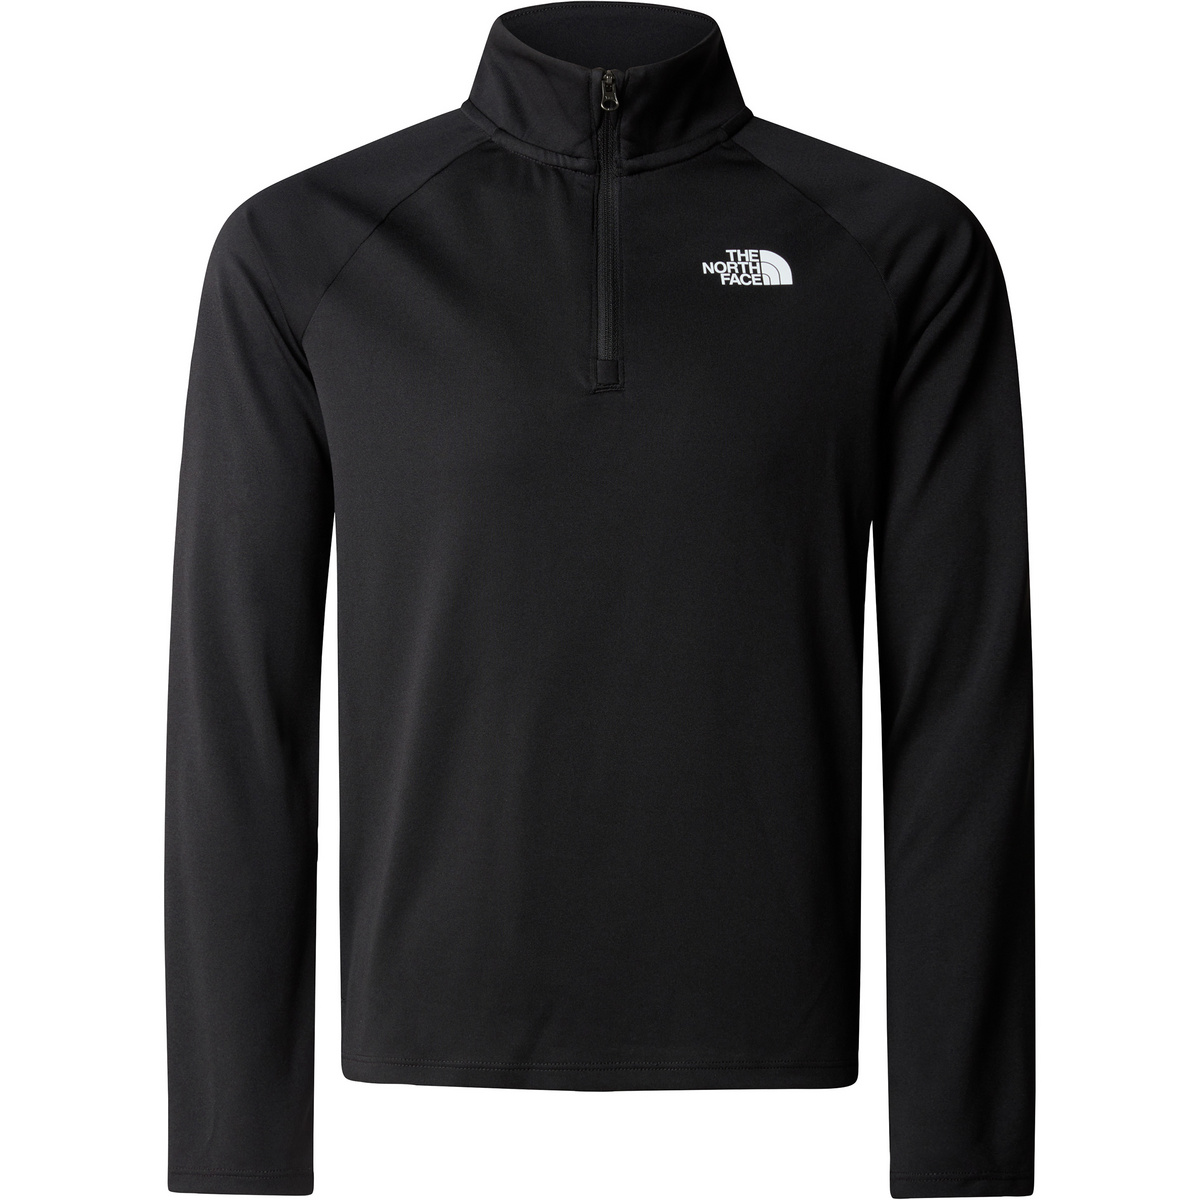 The North Face Kinder Never Stop 1/4 Zip Longsleeve von The North Face